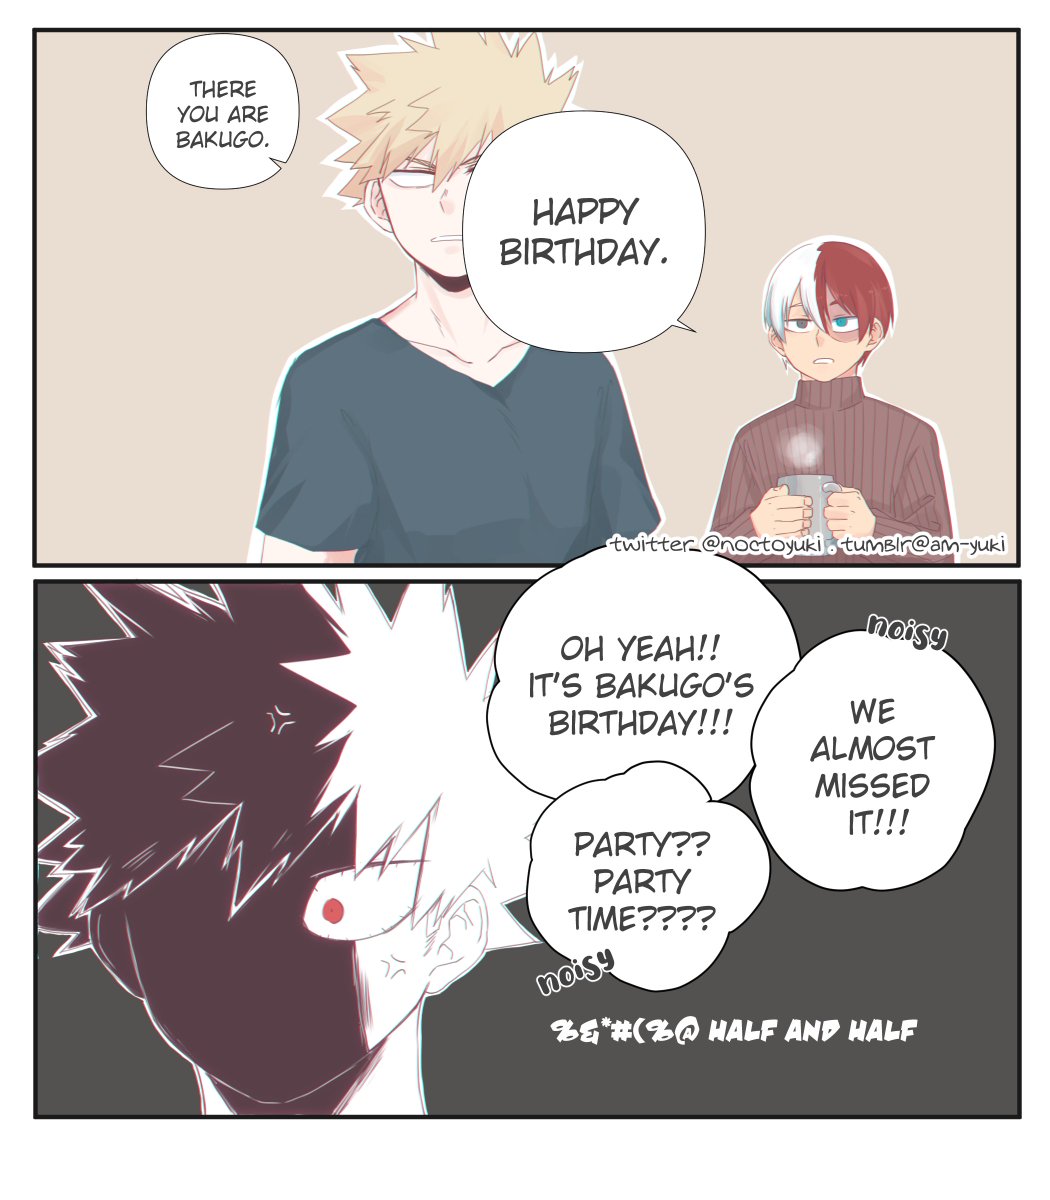 5 days more before Kacchan's Birthday. 

They may or may not have gone too wild while celebrating Kacchan's birthday back in school days. 